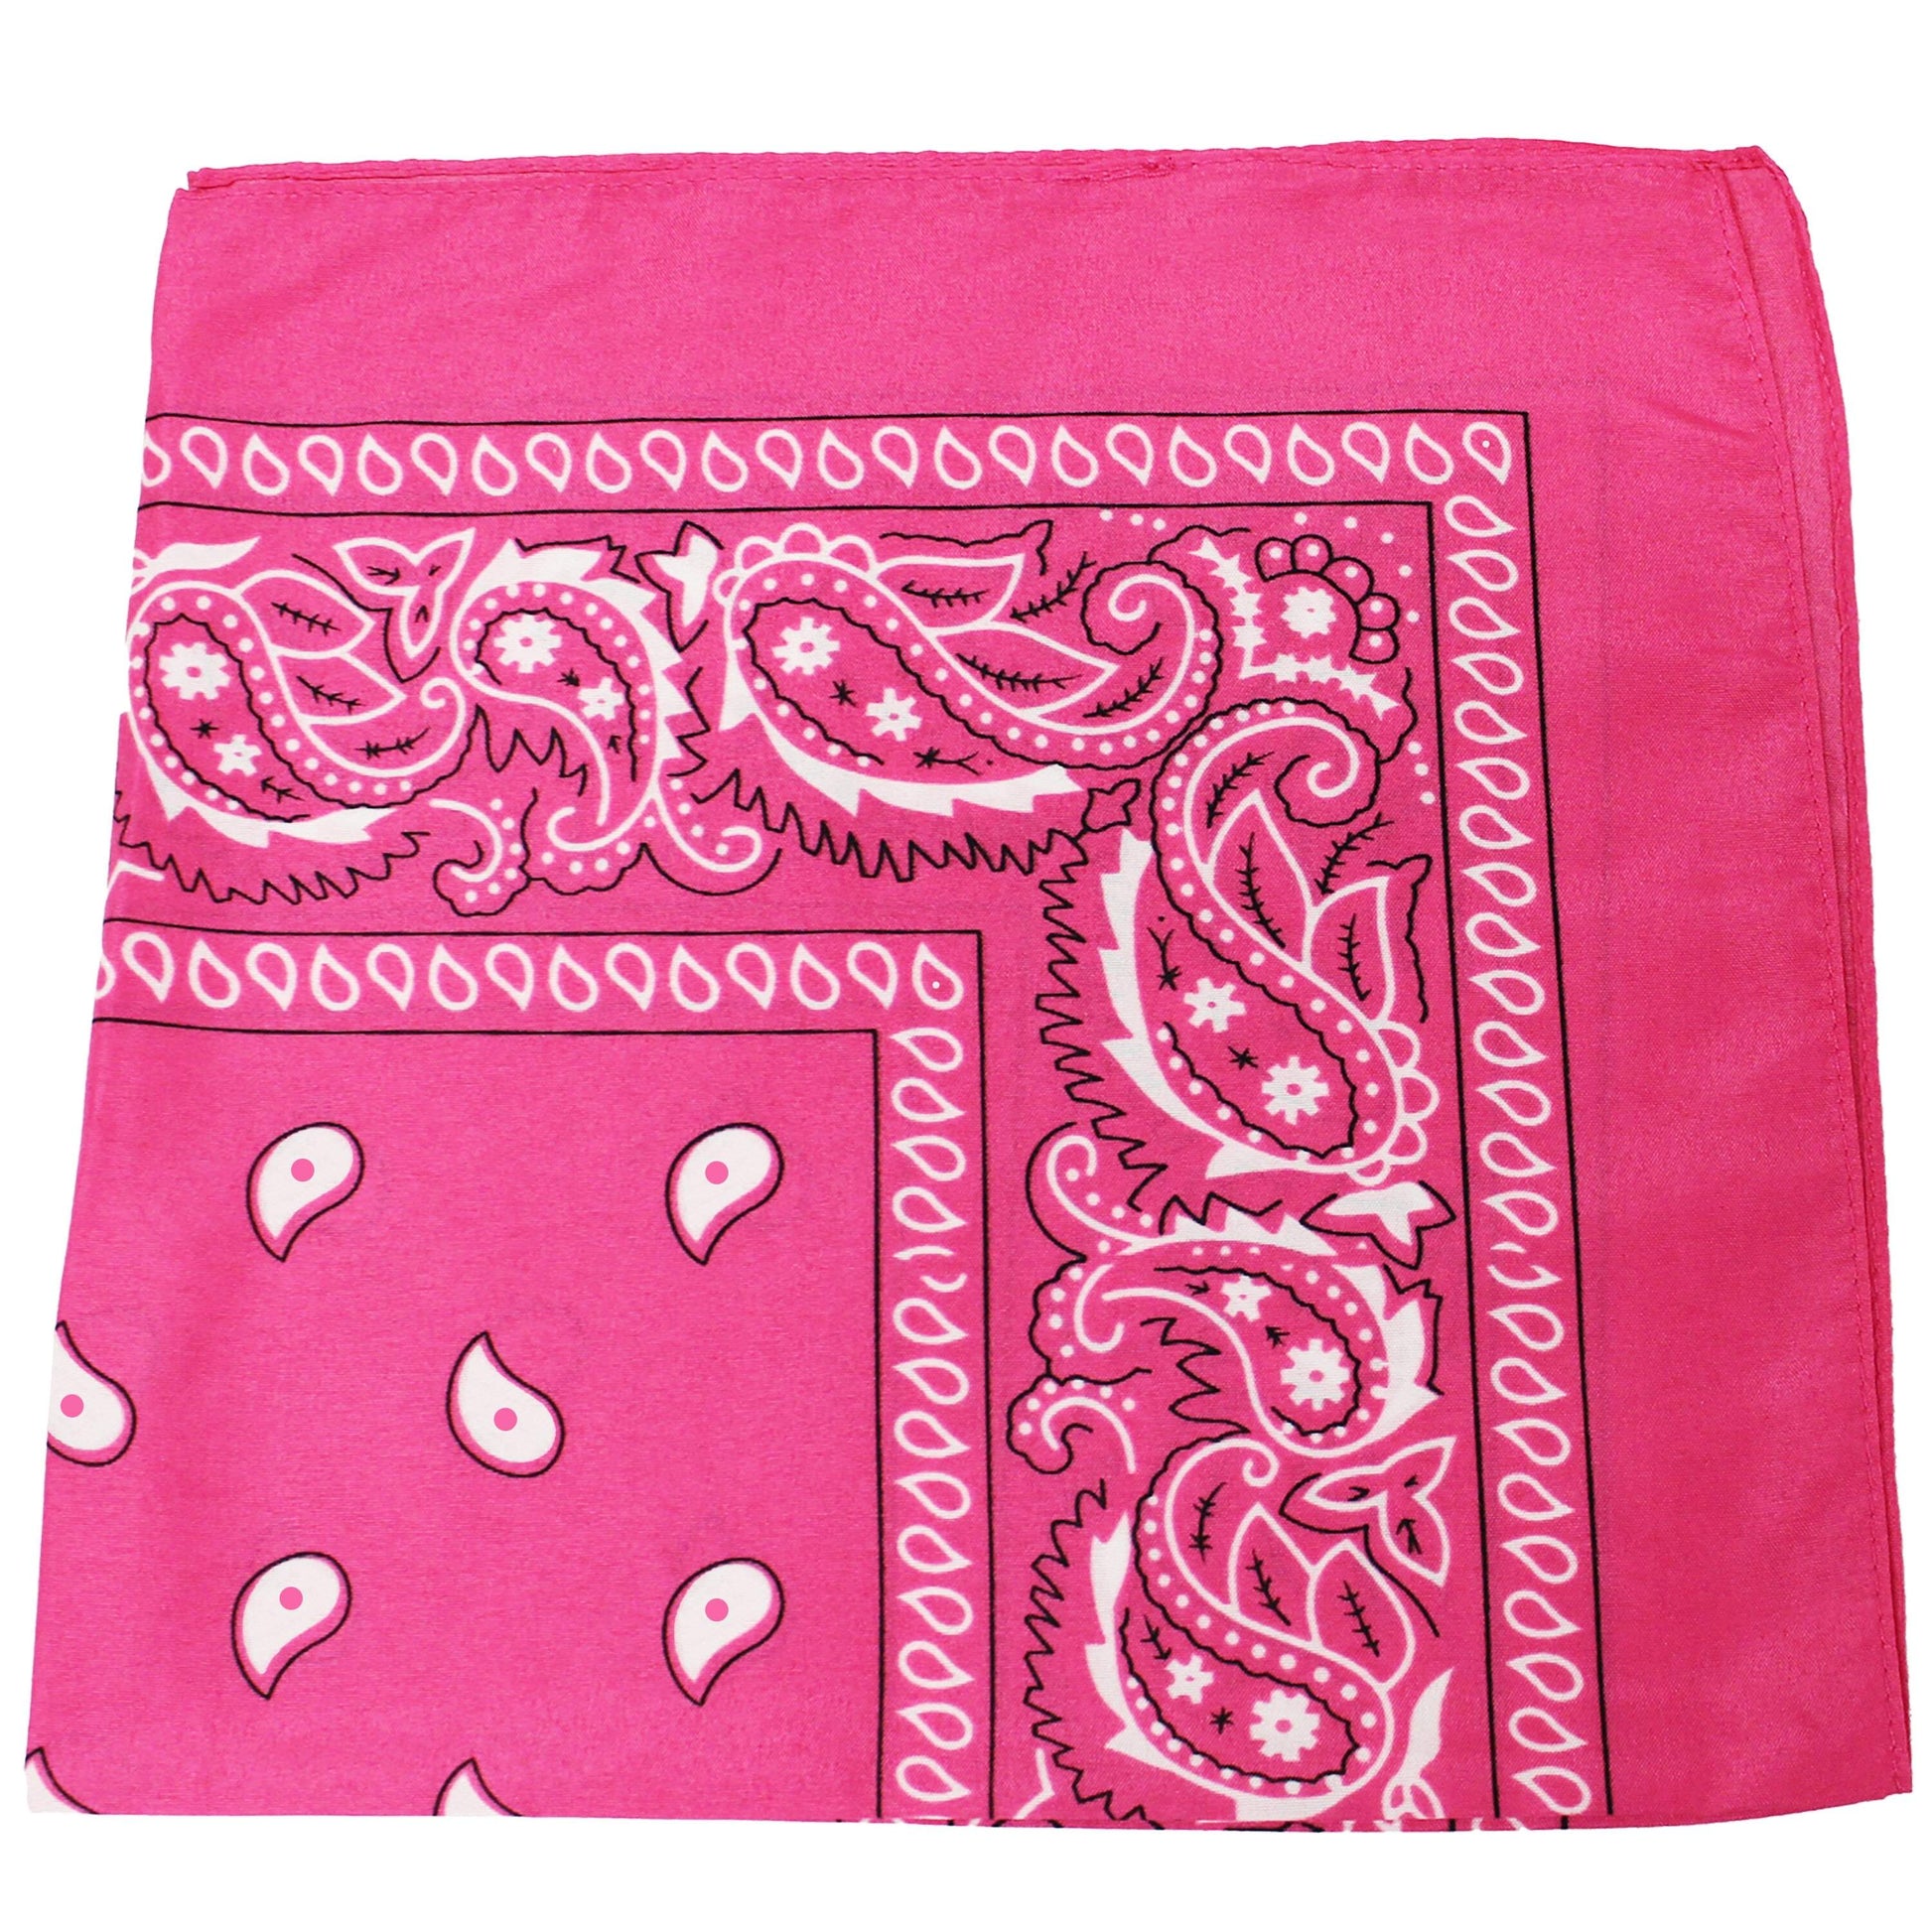 Pack of 12 X-Large Paisley Cotton Printed Bandana - 27 x 27 inches